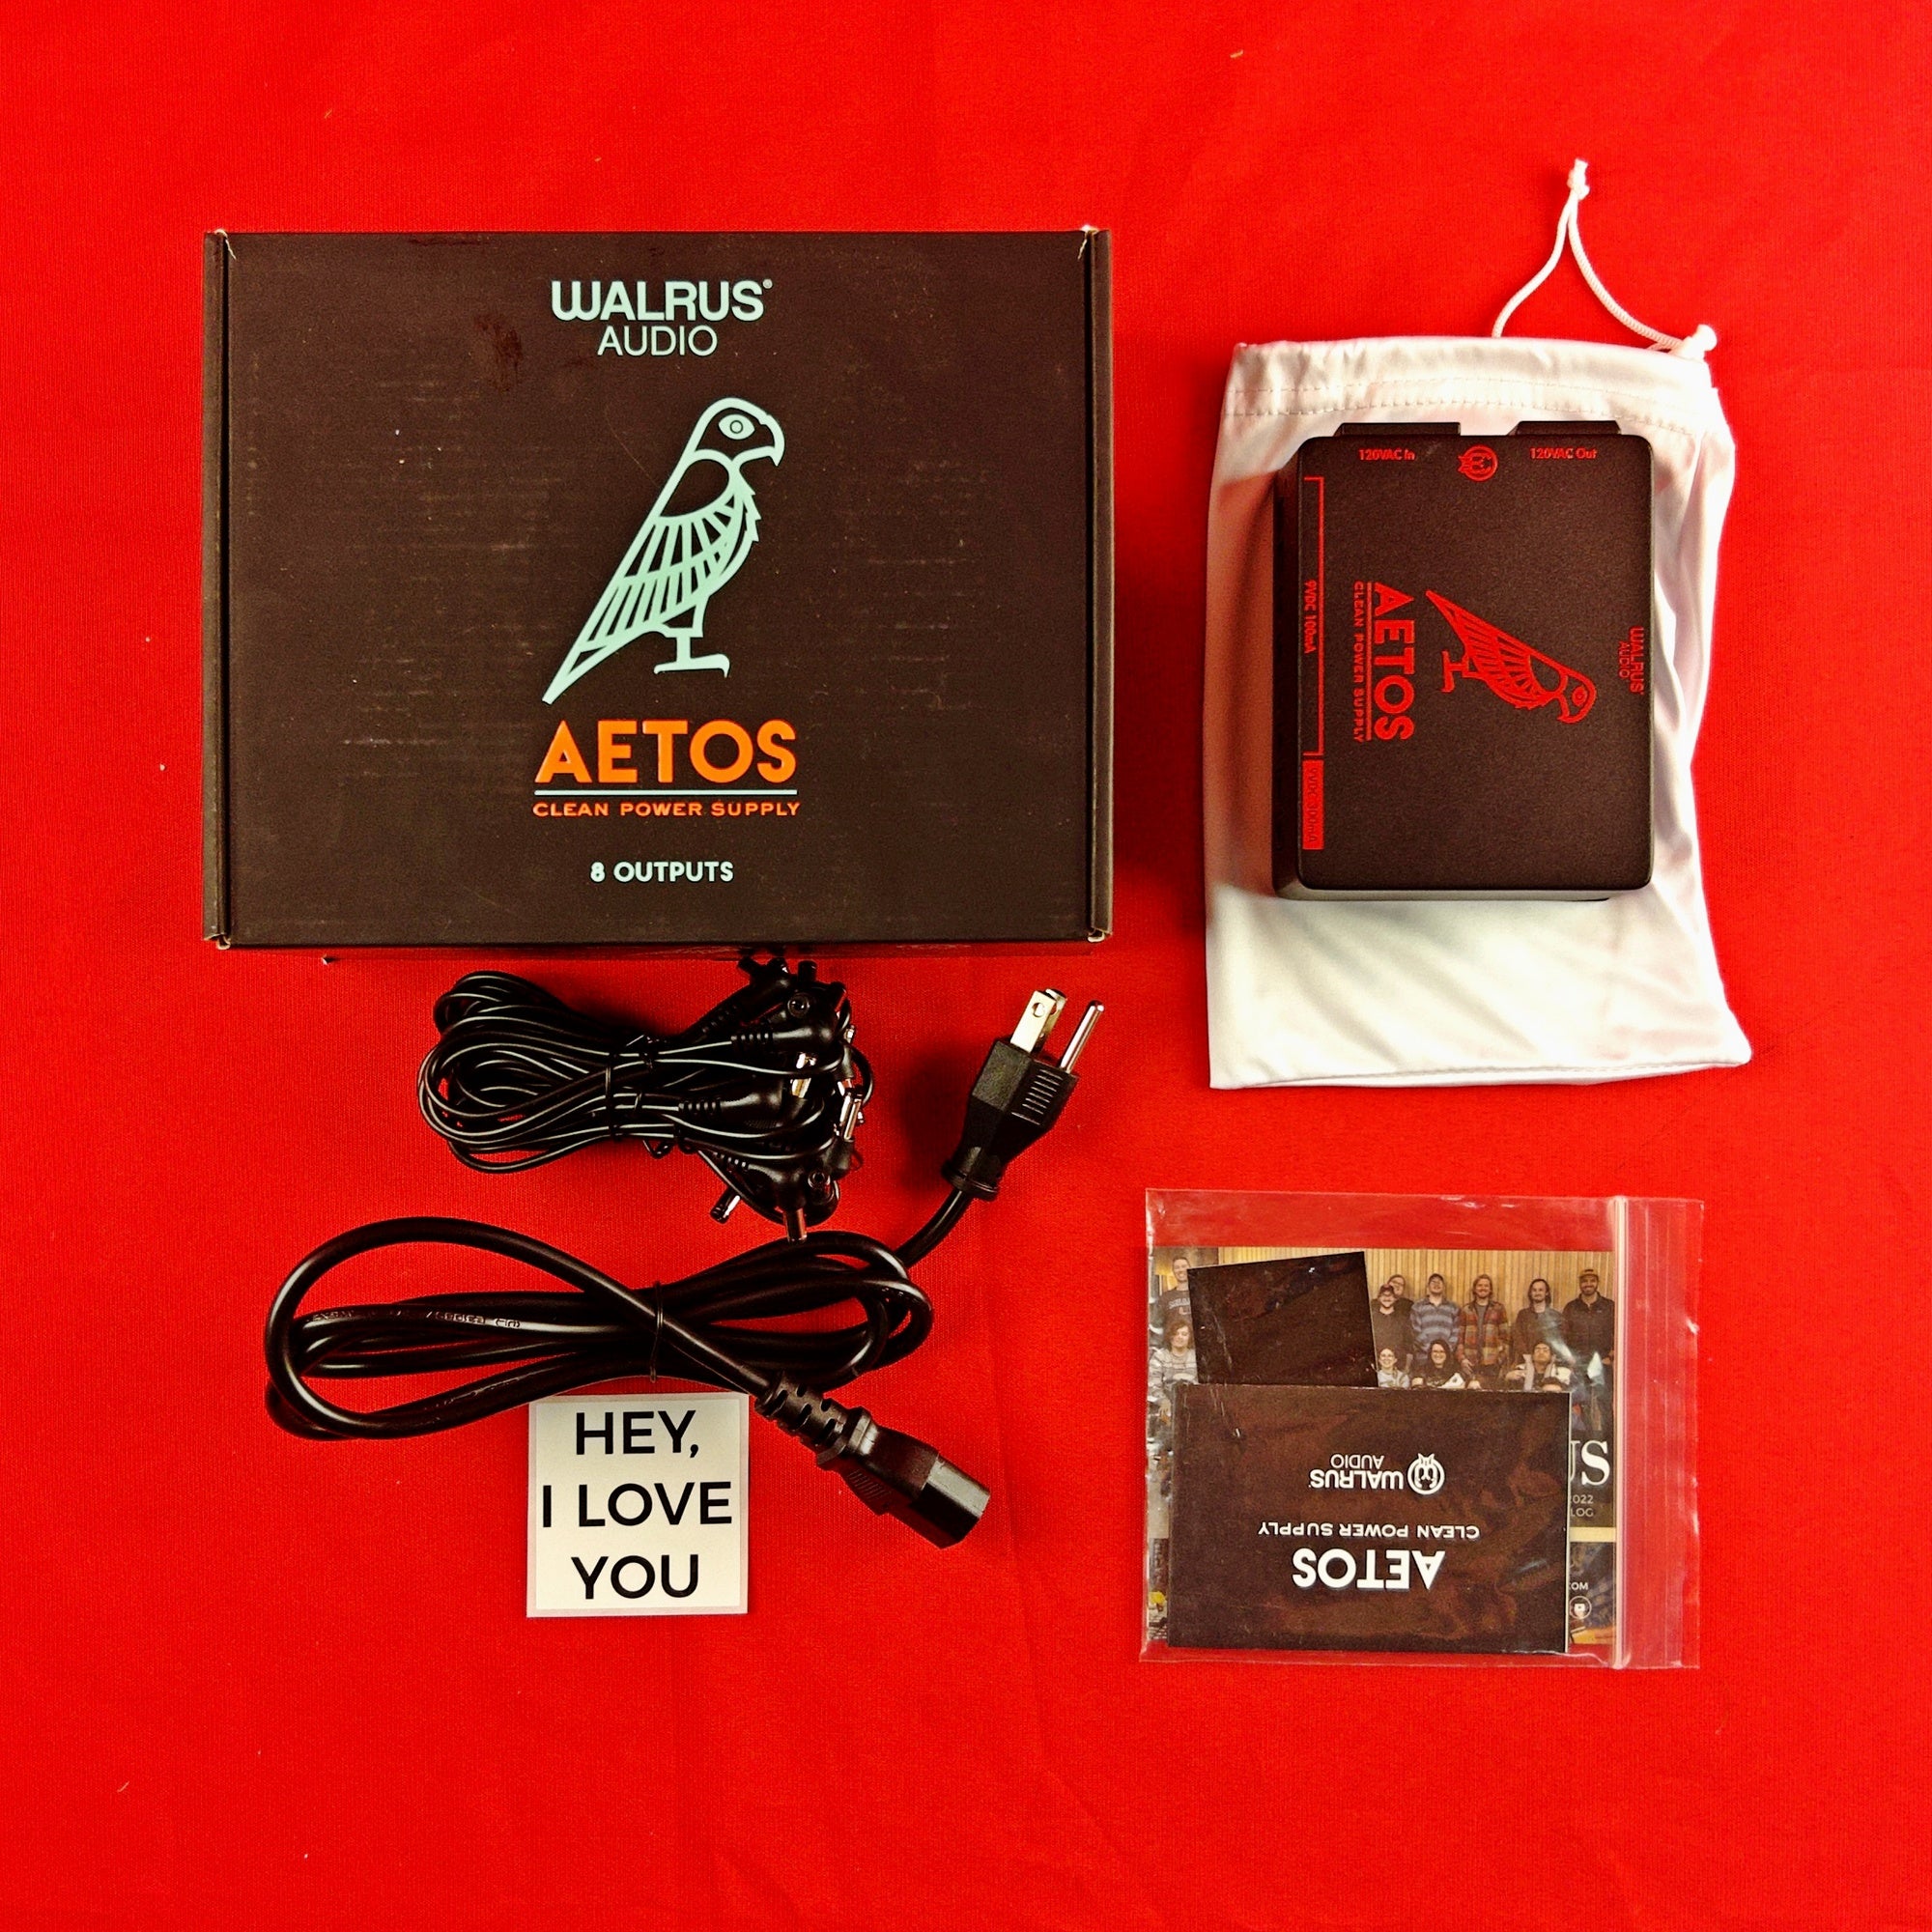 [USED] Walrus Audio Aetos 8 Output Power Supply, Black/Red (Gear Hero Exclusive)